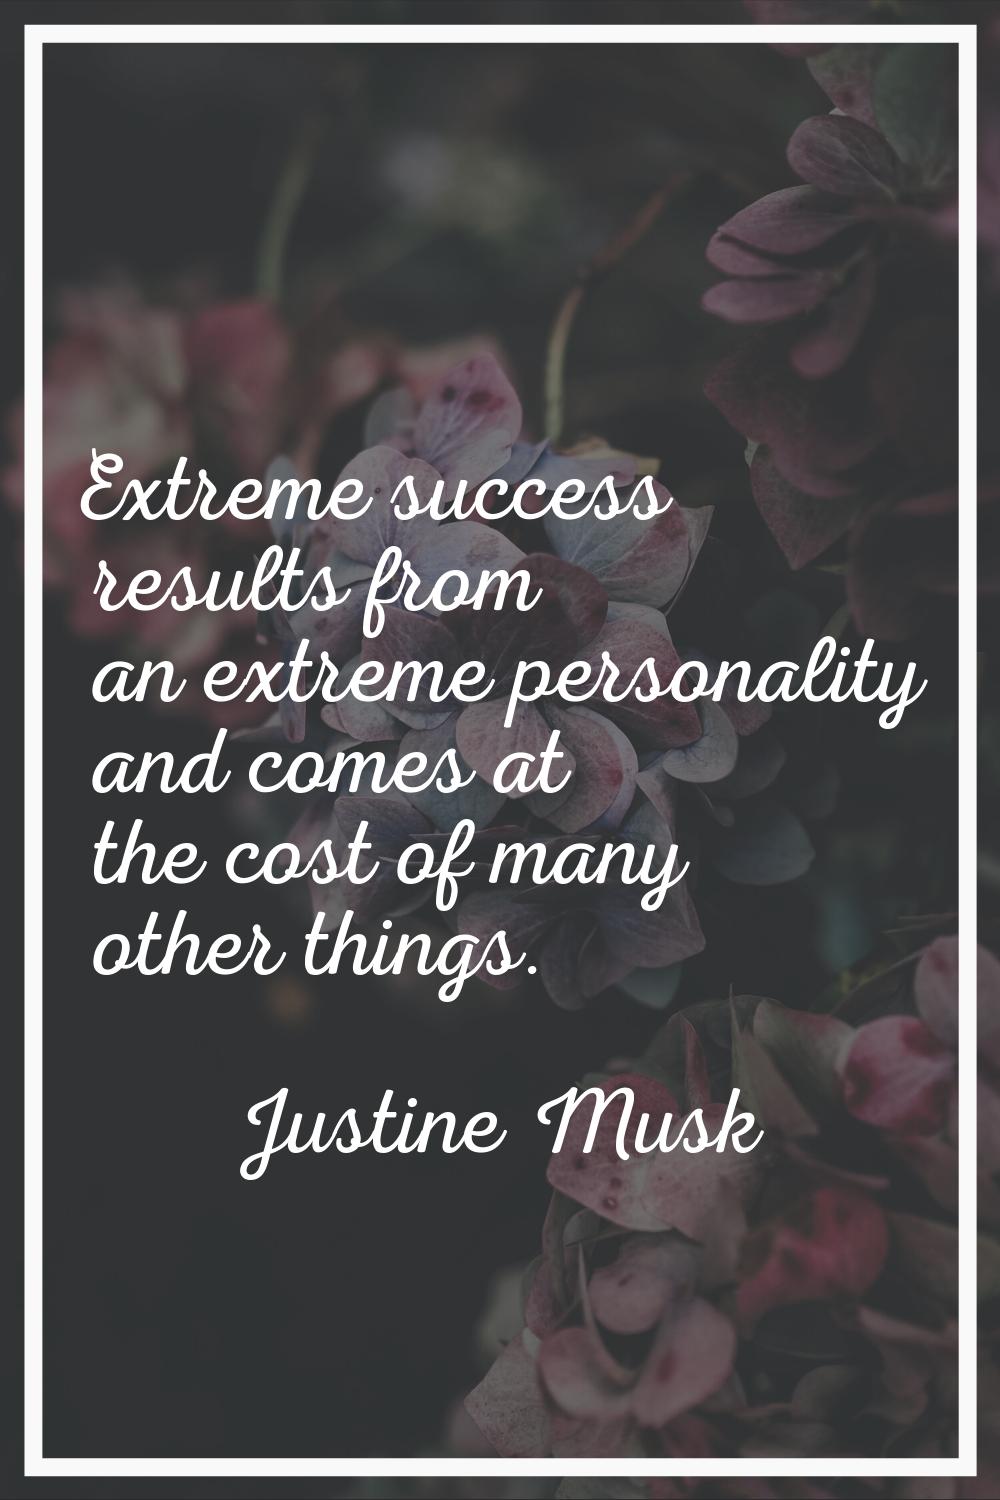 Extreme success results from an extreme personality and comes at the cost of many other things.